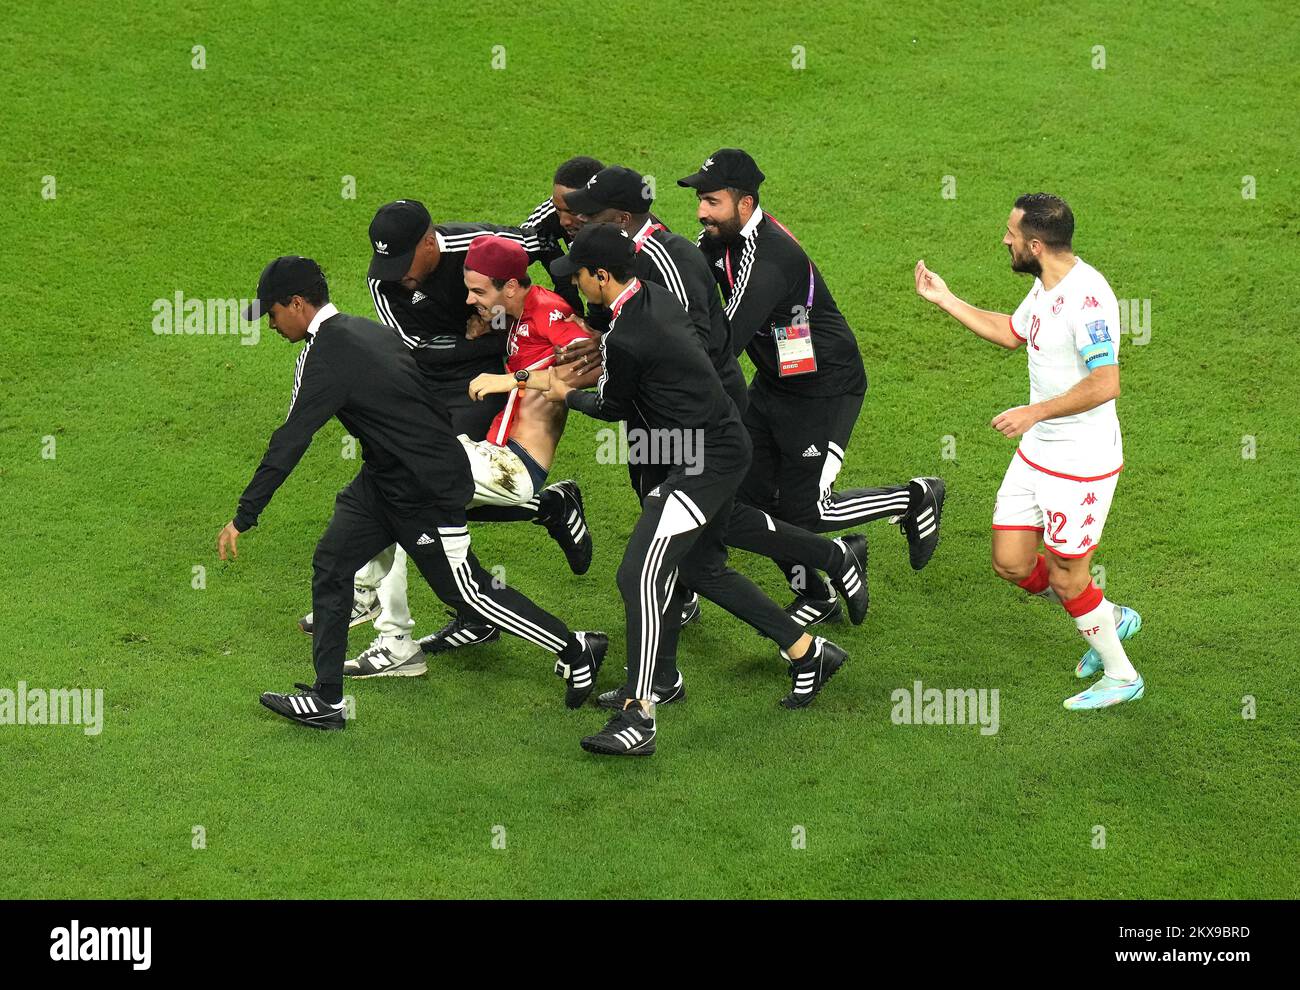 A pitch invader is escorted off the pitch as Tunisia's Ali Maaloul (right) speaks to security during the FIFA World Cup Group D match at the Education City Stadium in Al Rayyan, Qatar. Picture date: Wednesday November 30, 2022. Stock Photo